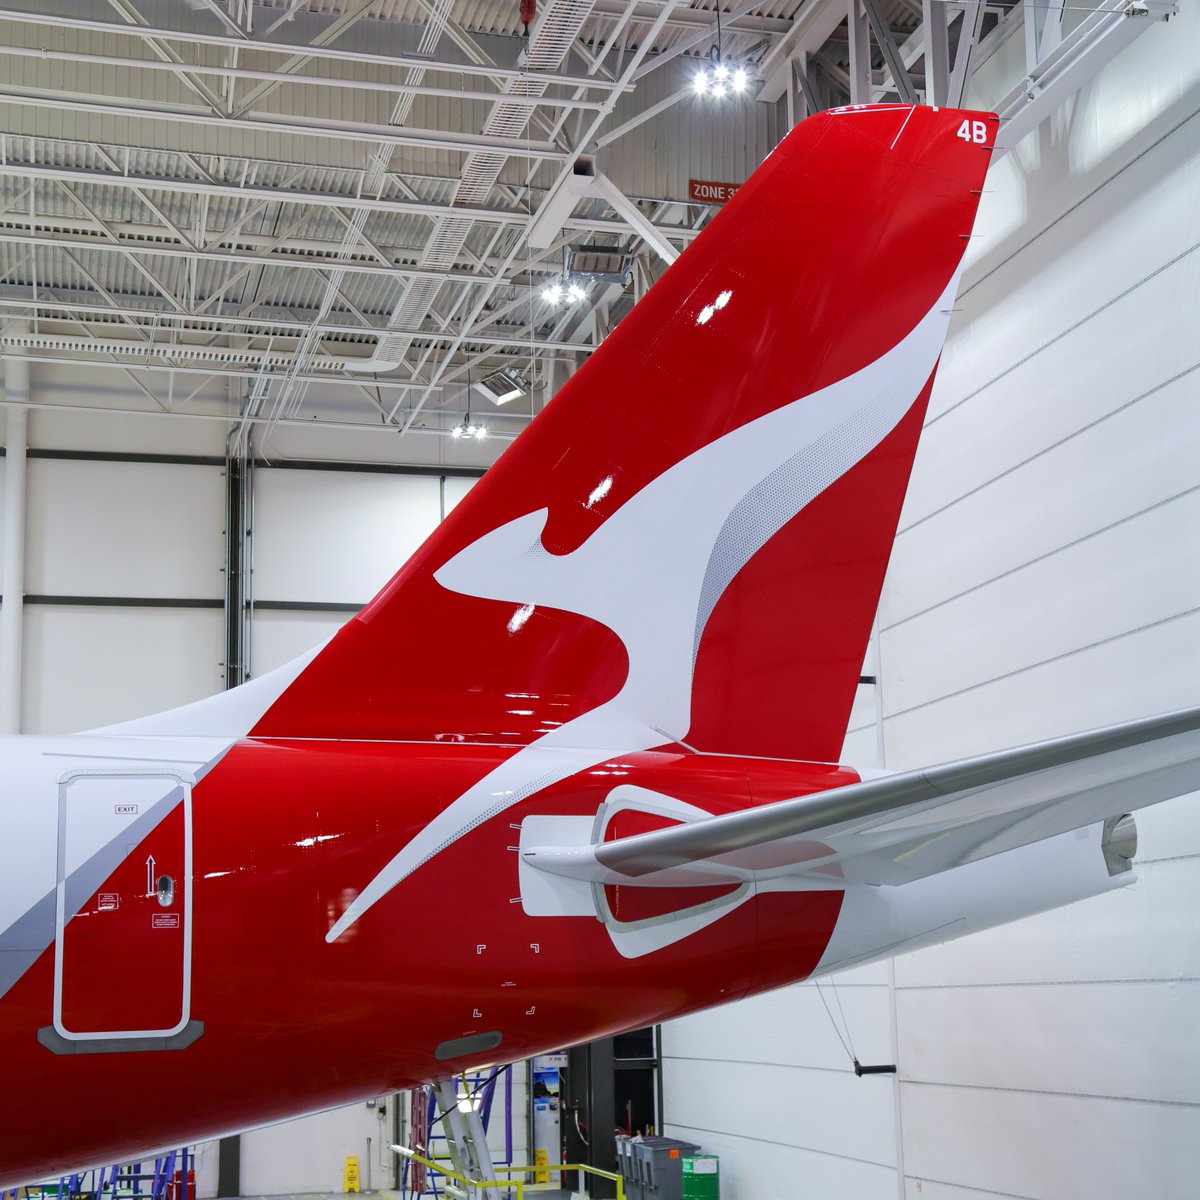 Say hello to our newest @Airbus A220-300! 🐨 'Koala' took to the skies for the first time in recent days and will arrive in Australia next week following the official handover from Airbus in Mirabel, Canada. The aircraft is the first of our A220 fleet to be named after native